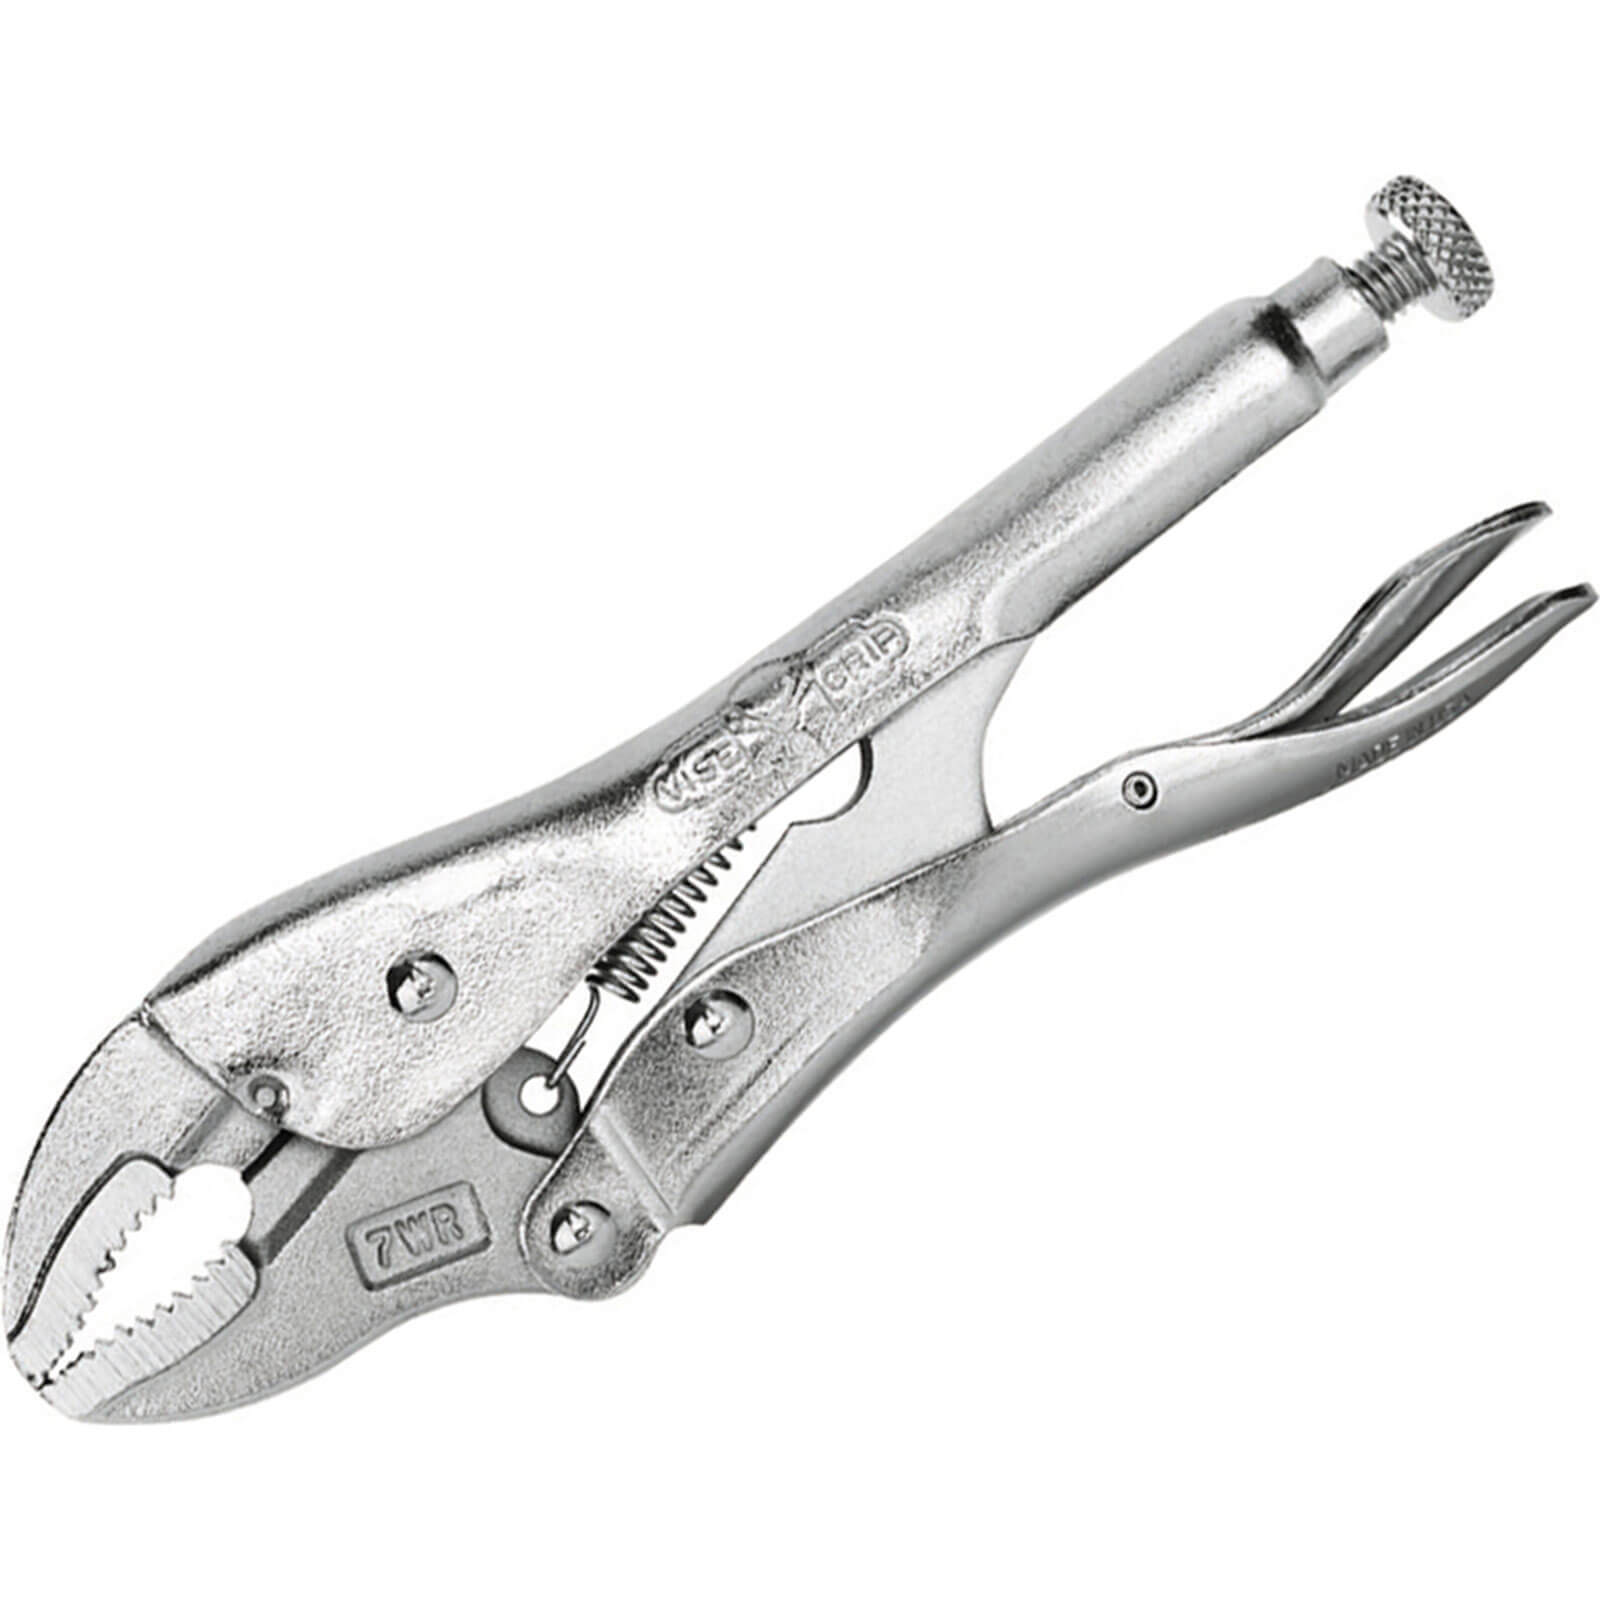 Photo of Irwin Vise Grip Curved Jaw Wire Cutting Locking Pliers 180mm